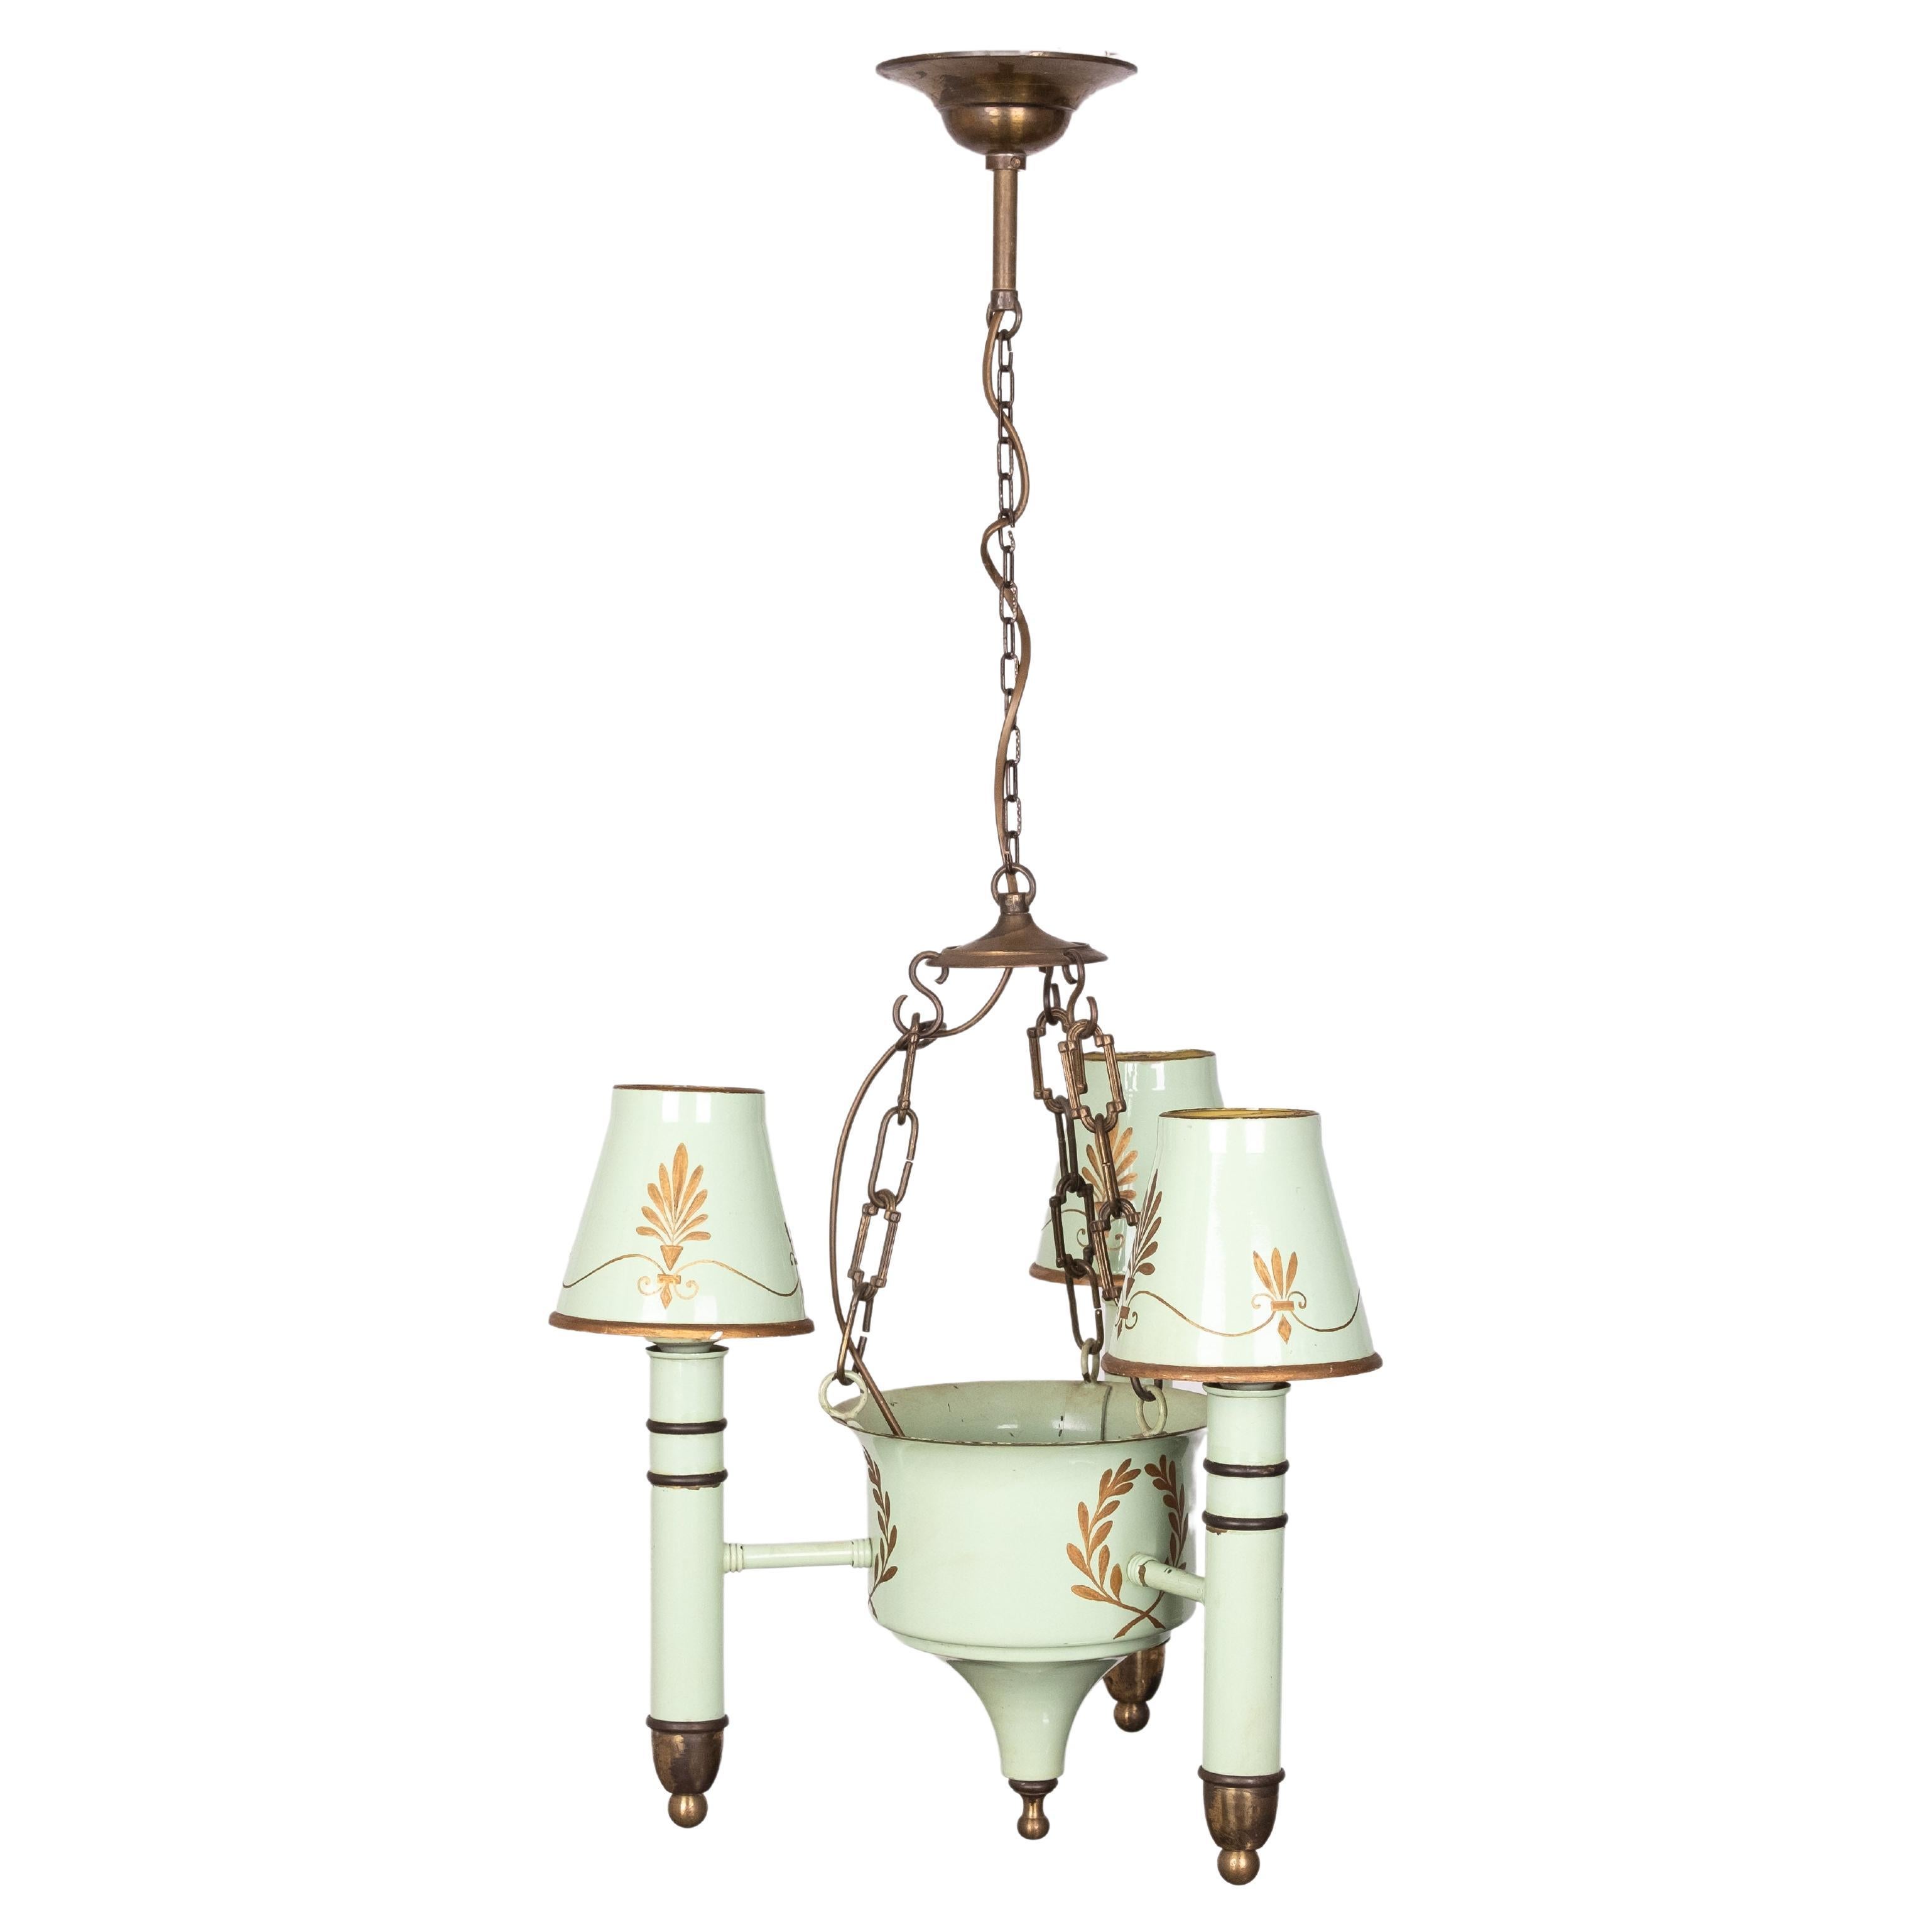 French antique chandelier quinquet 5 lights painted tole 19th directoire empire For Sale